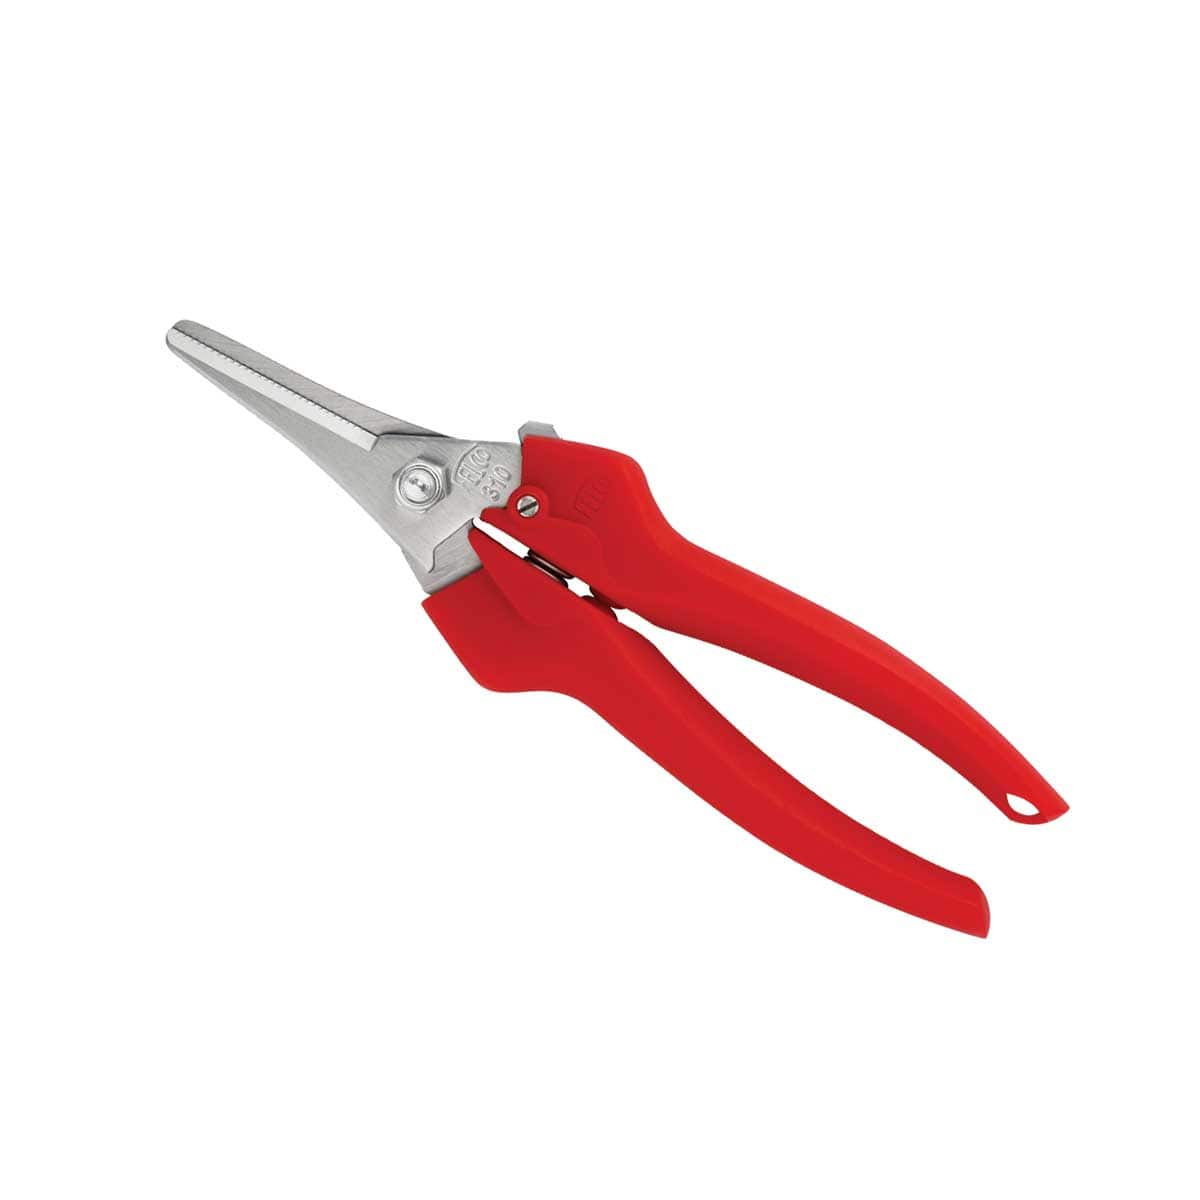 FELCO 310 Picking and Trimming Snip